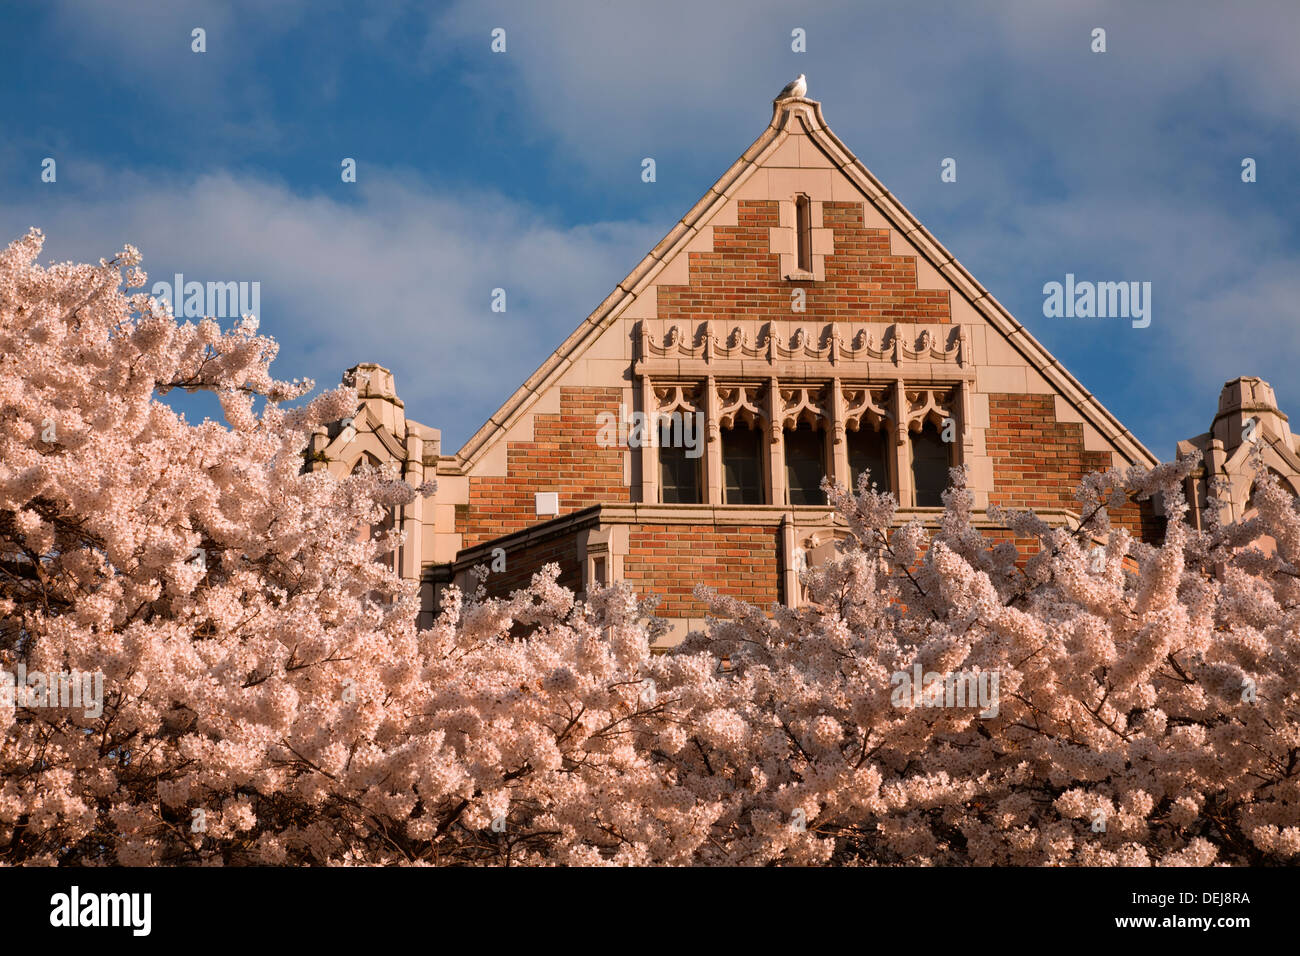 WASHINGTON - Cherry trees in bloom in the Quad of the University of Washington in Seattle. Stock Photo